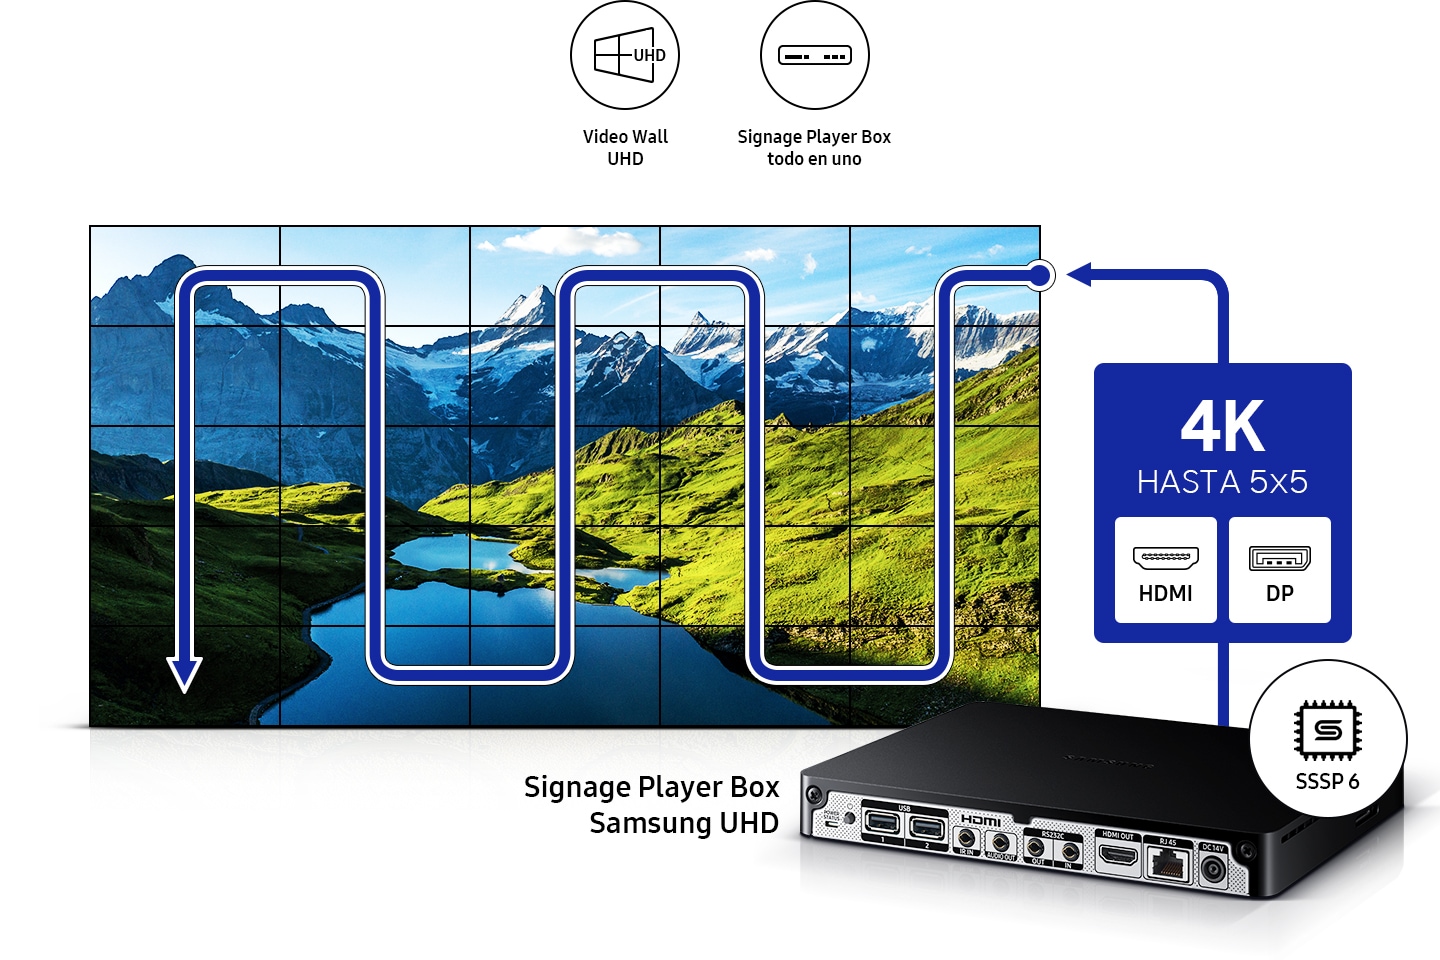 Up to 5X5, 4K signals are transmitted from All-in-one Samsung UHD Signage Player Box with SSSP 6 to Video Wall via HDMI or DP.